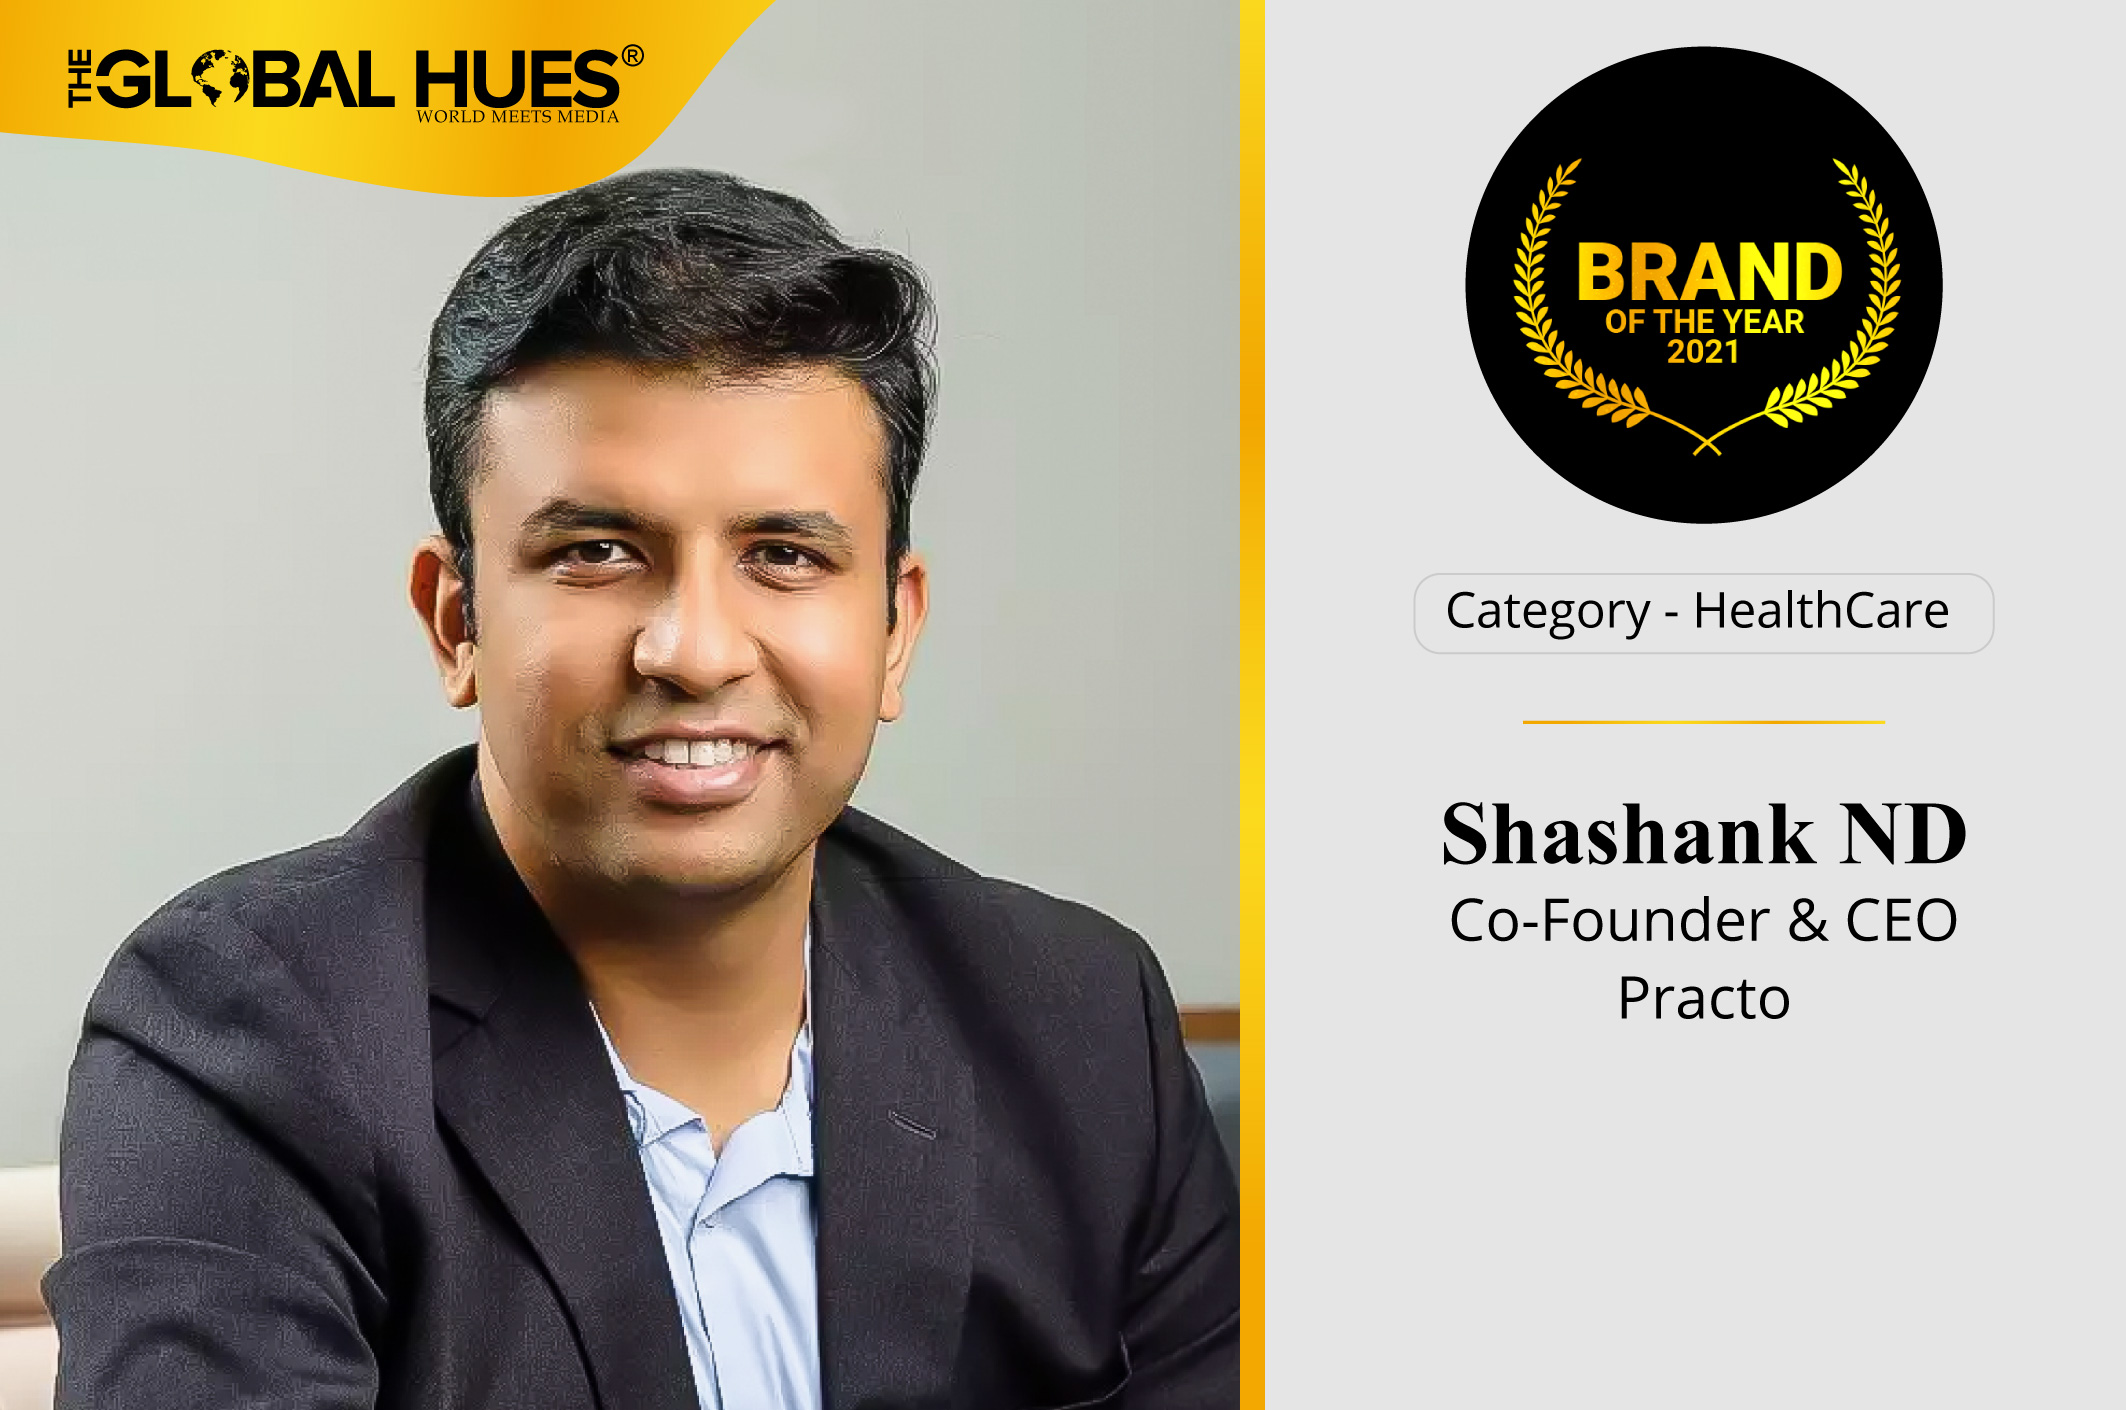 Shashank ND Co-Founder & CEO Practo